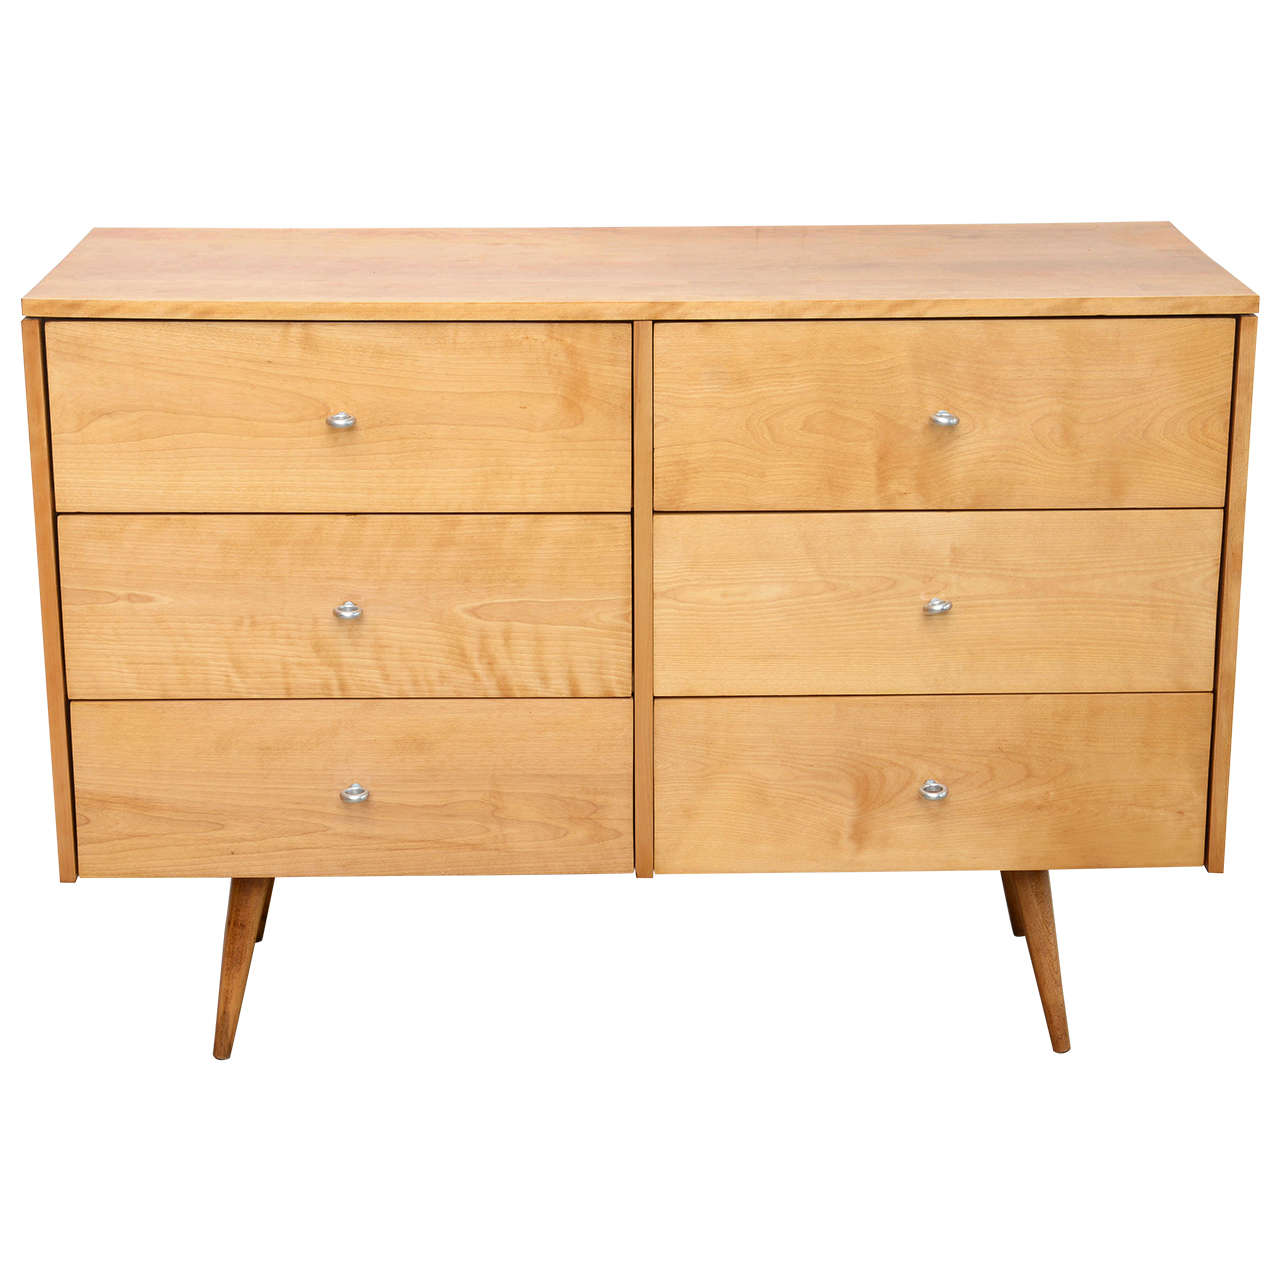 Midcentury Modern Dresser by Paul Mccob for Winchedon's Planner Group